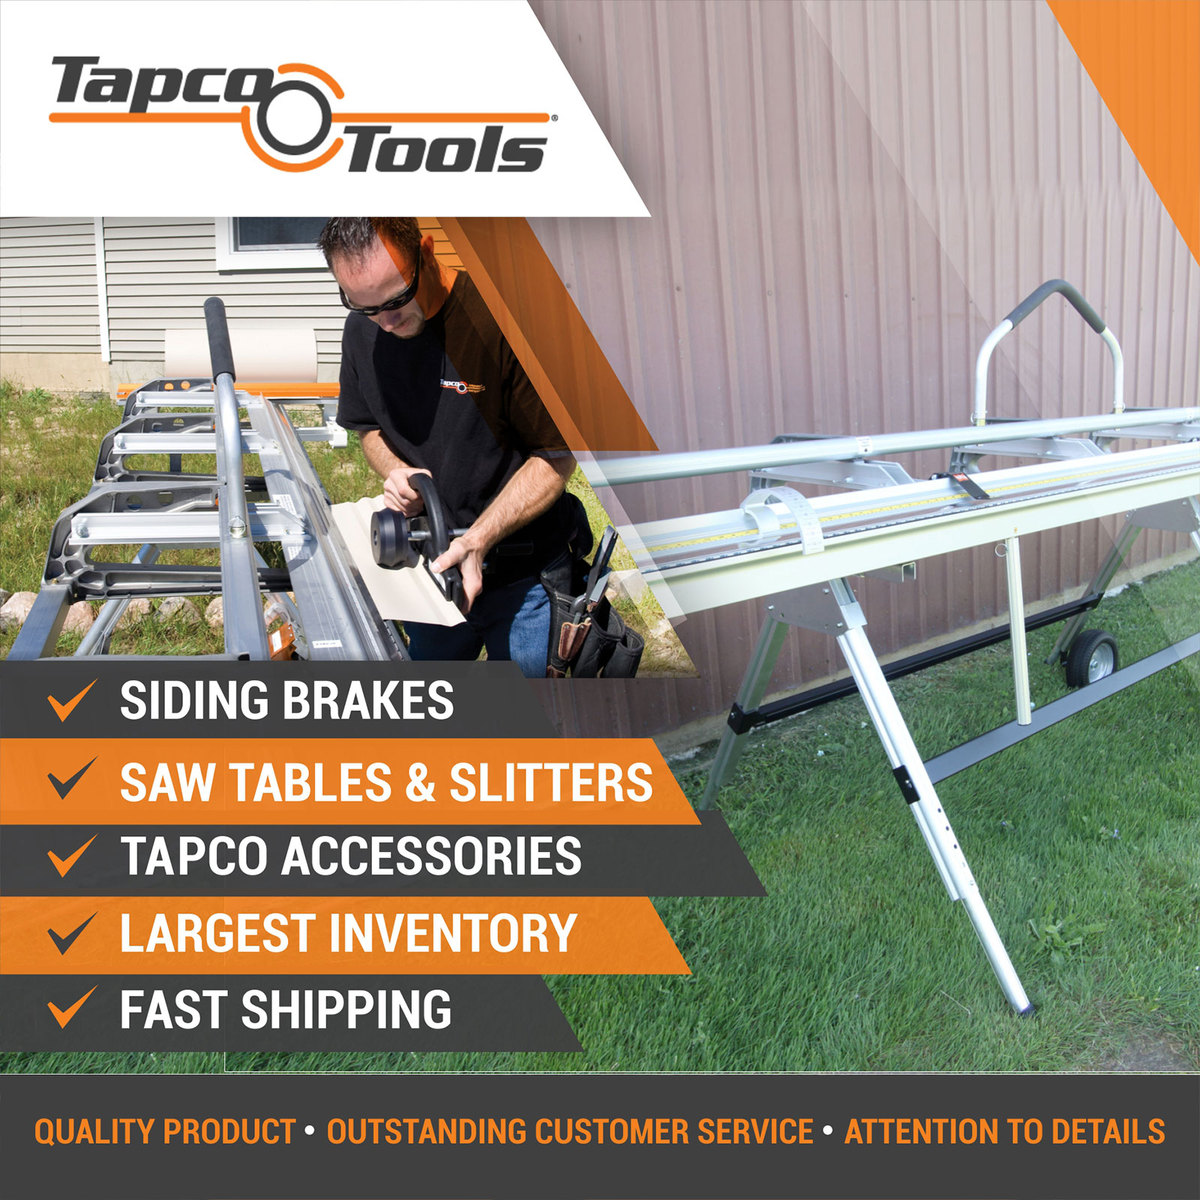 Tapco Tools quality products, oustanding customer service and attention to details.